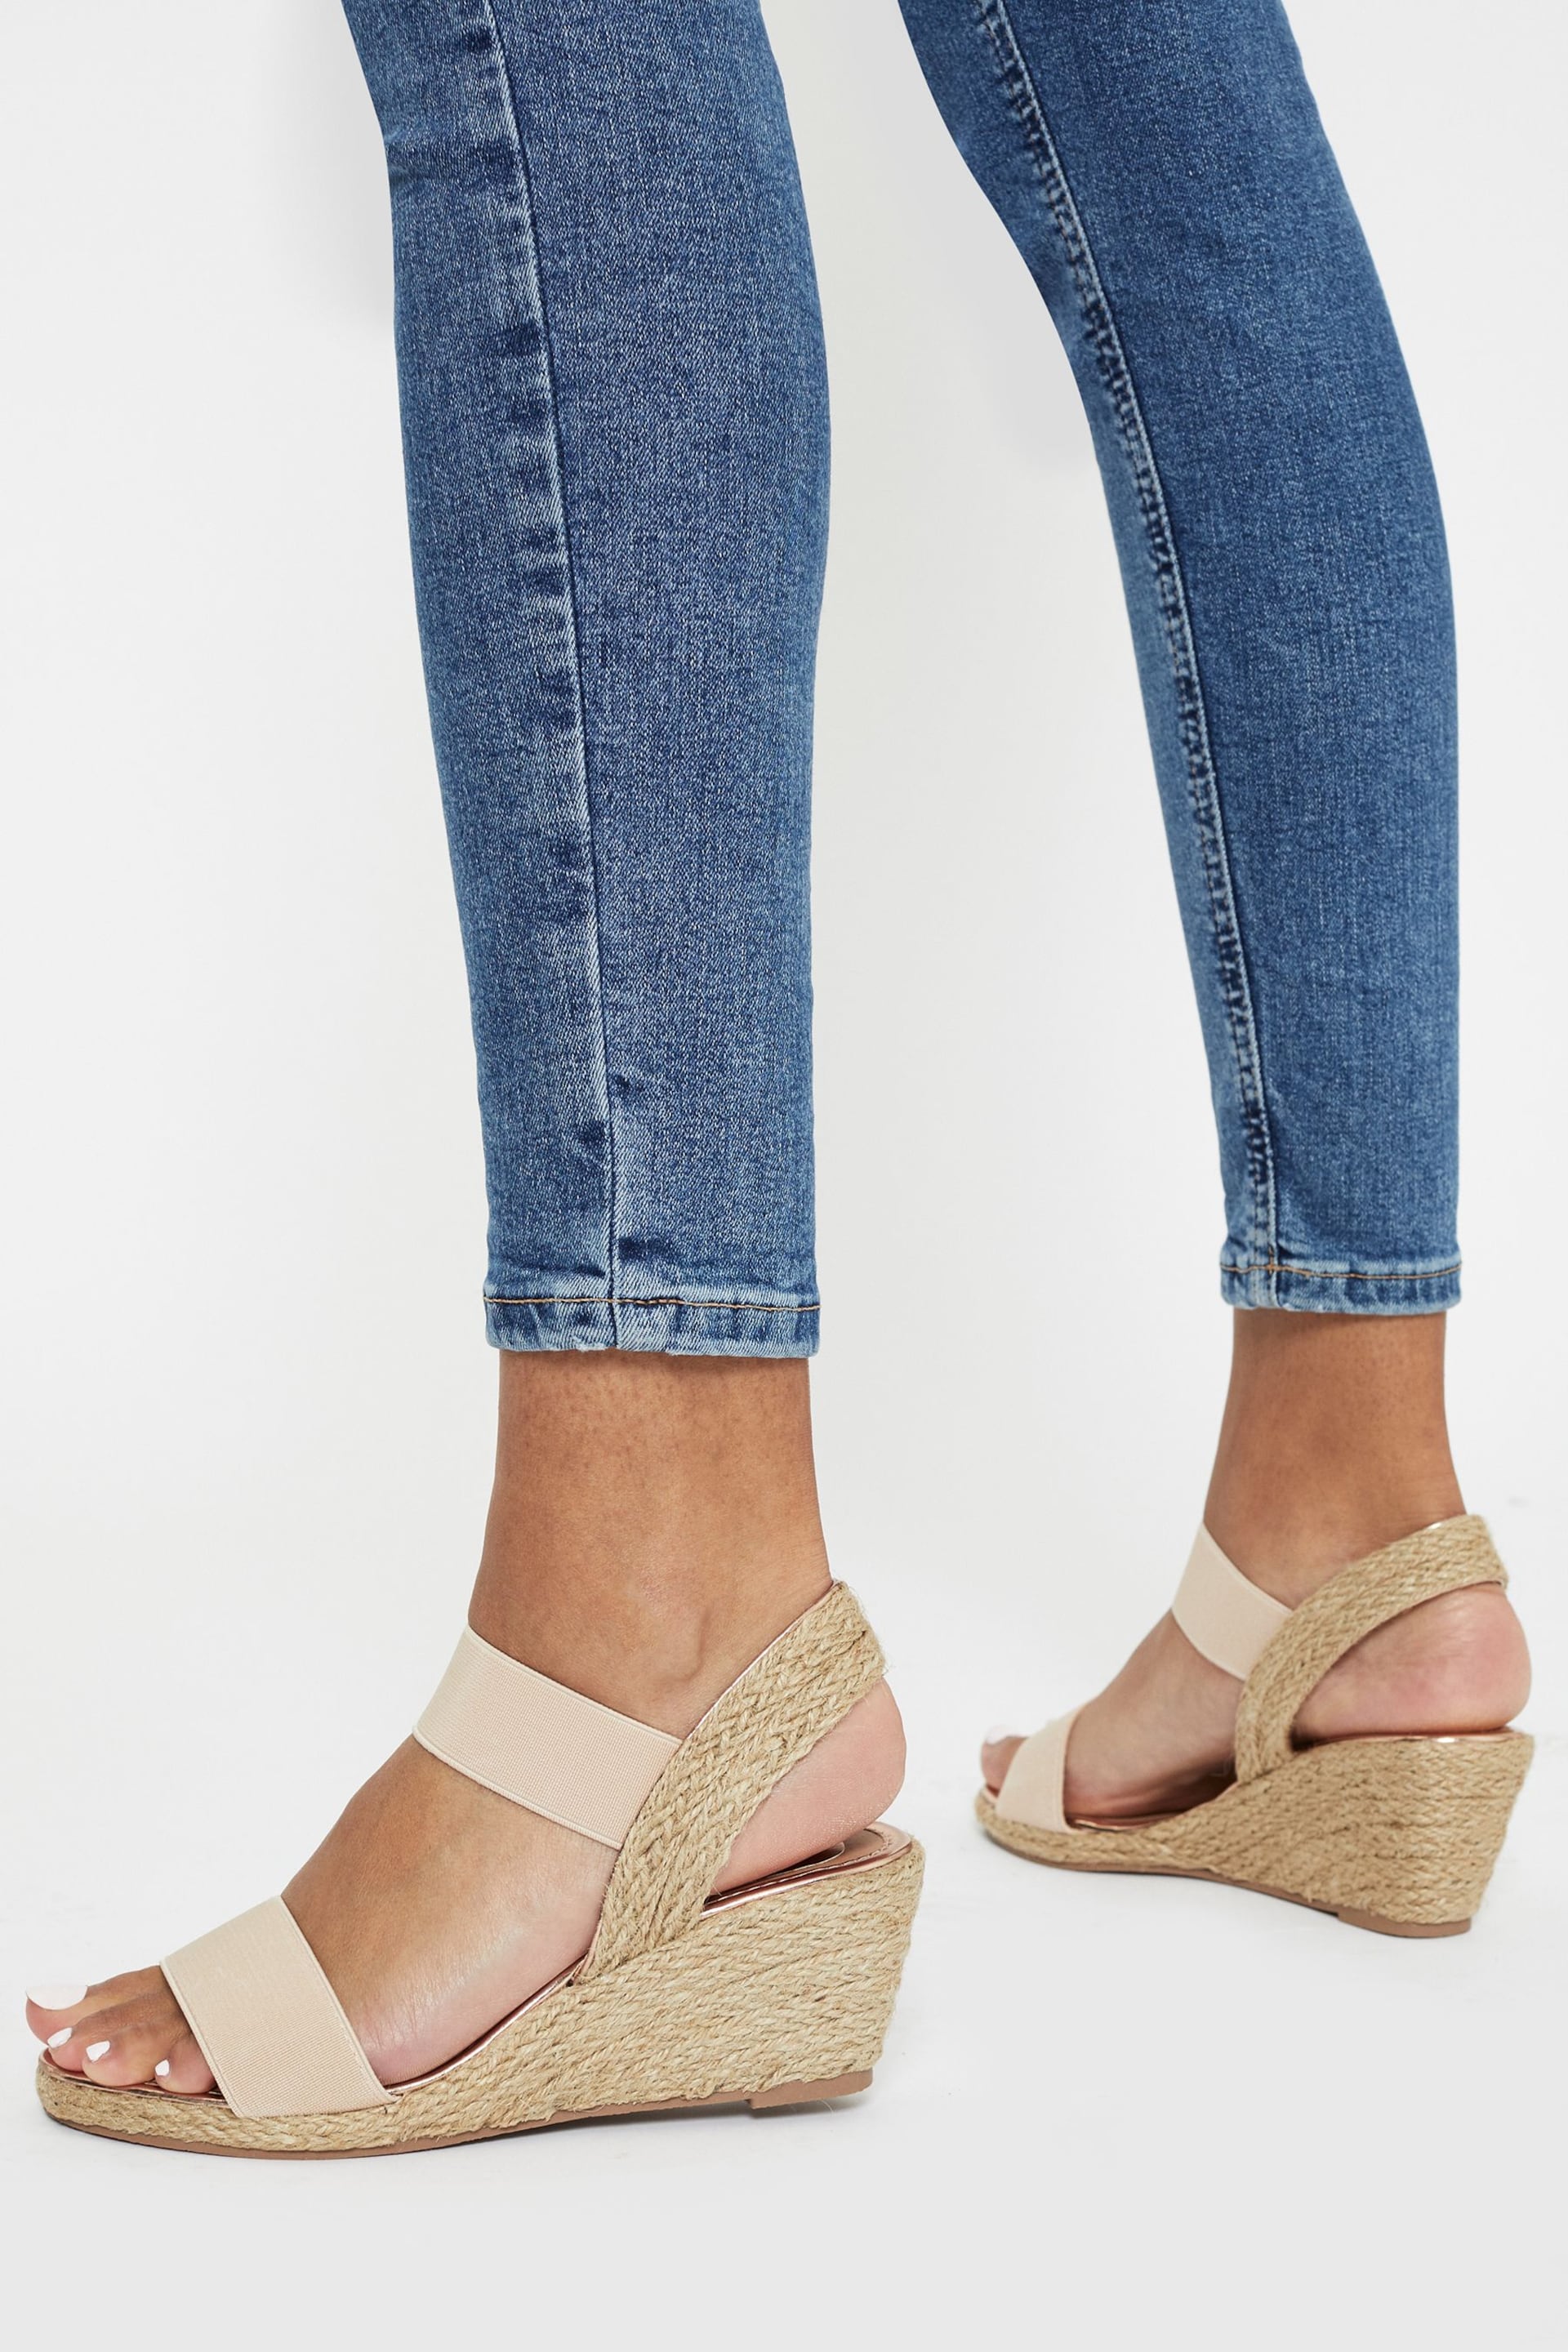 Lipsy Nude Pink Extra Wide Fit Elastic Low Wedge Espadrille Sandal - Image 3 of 3